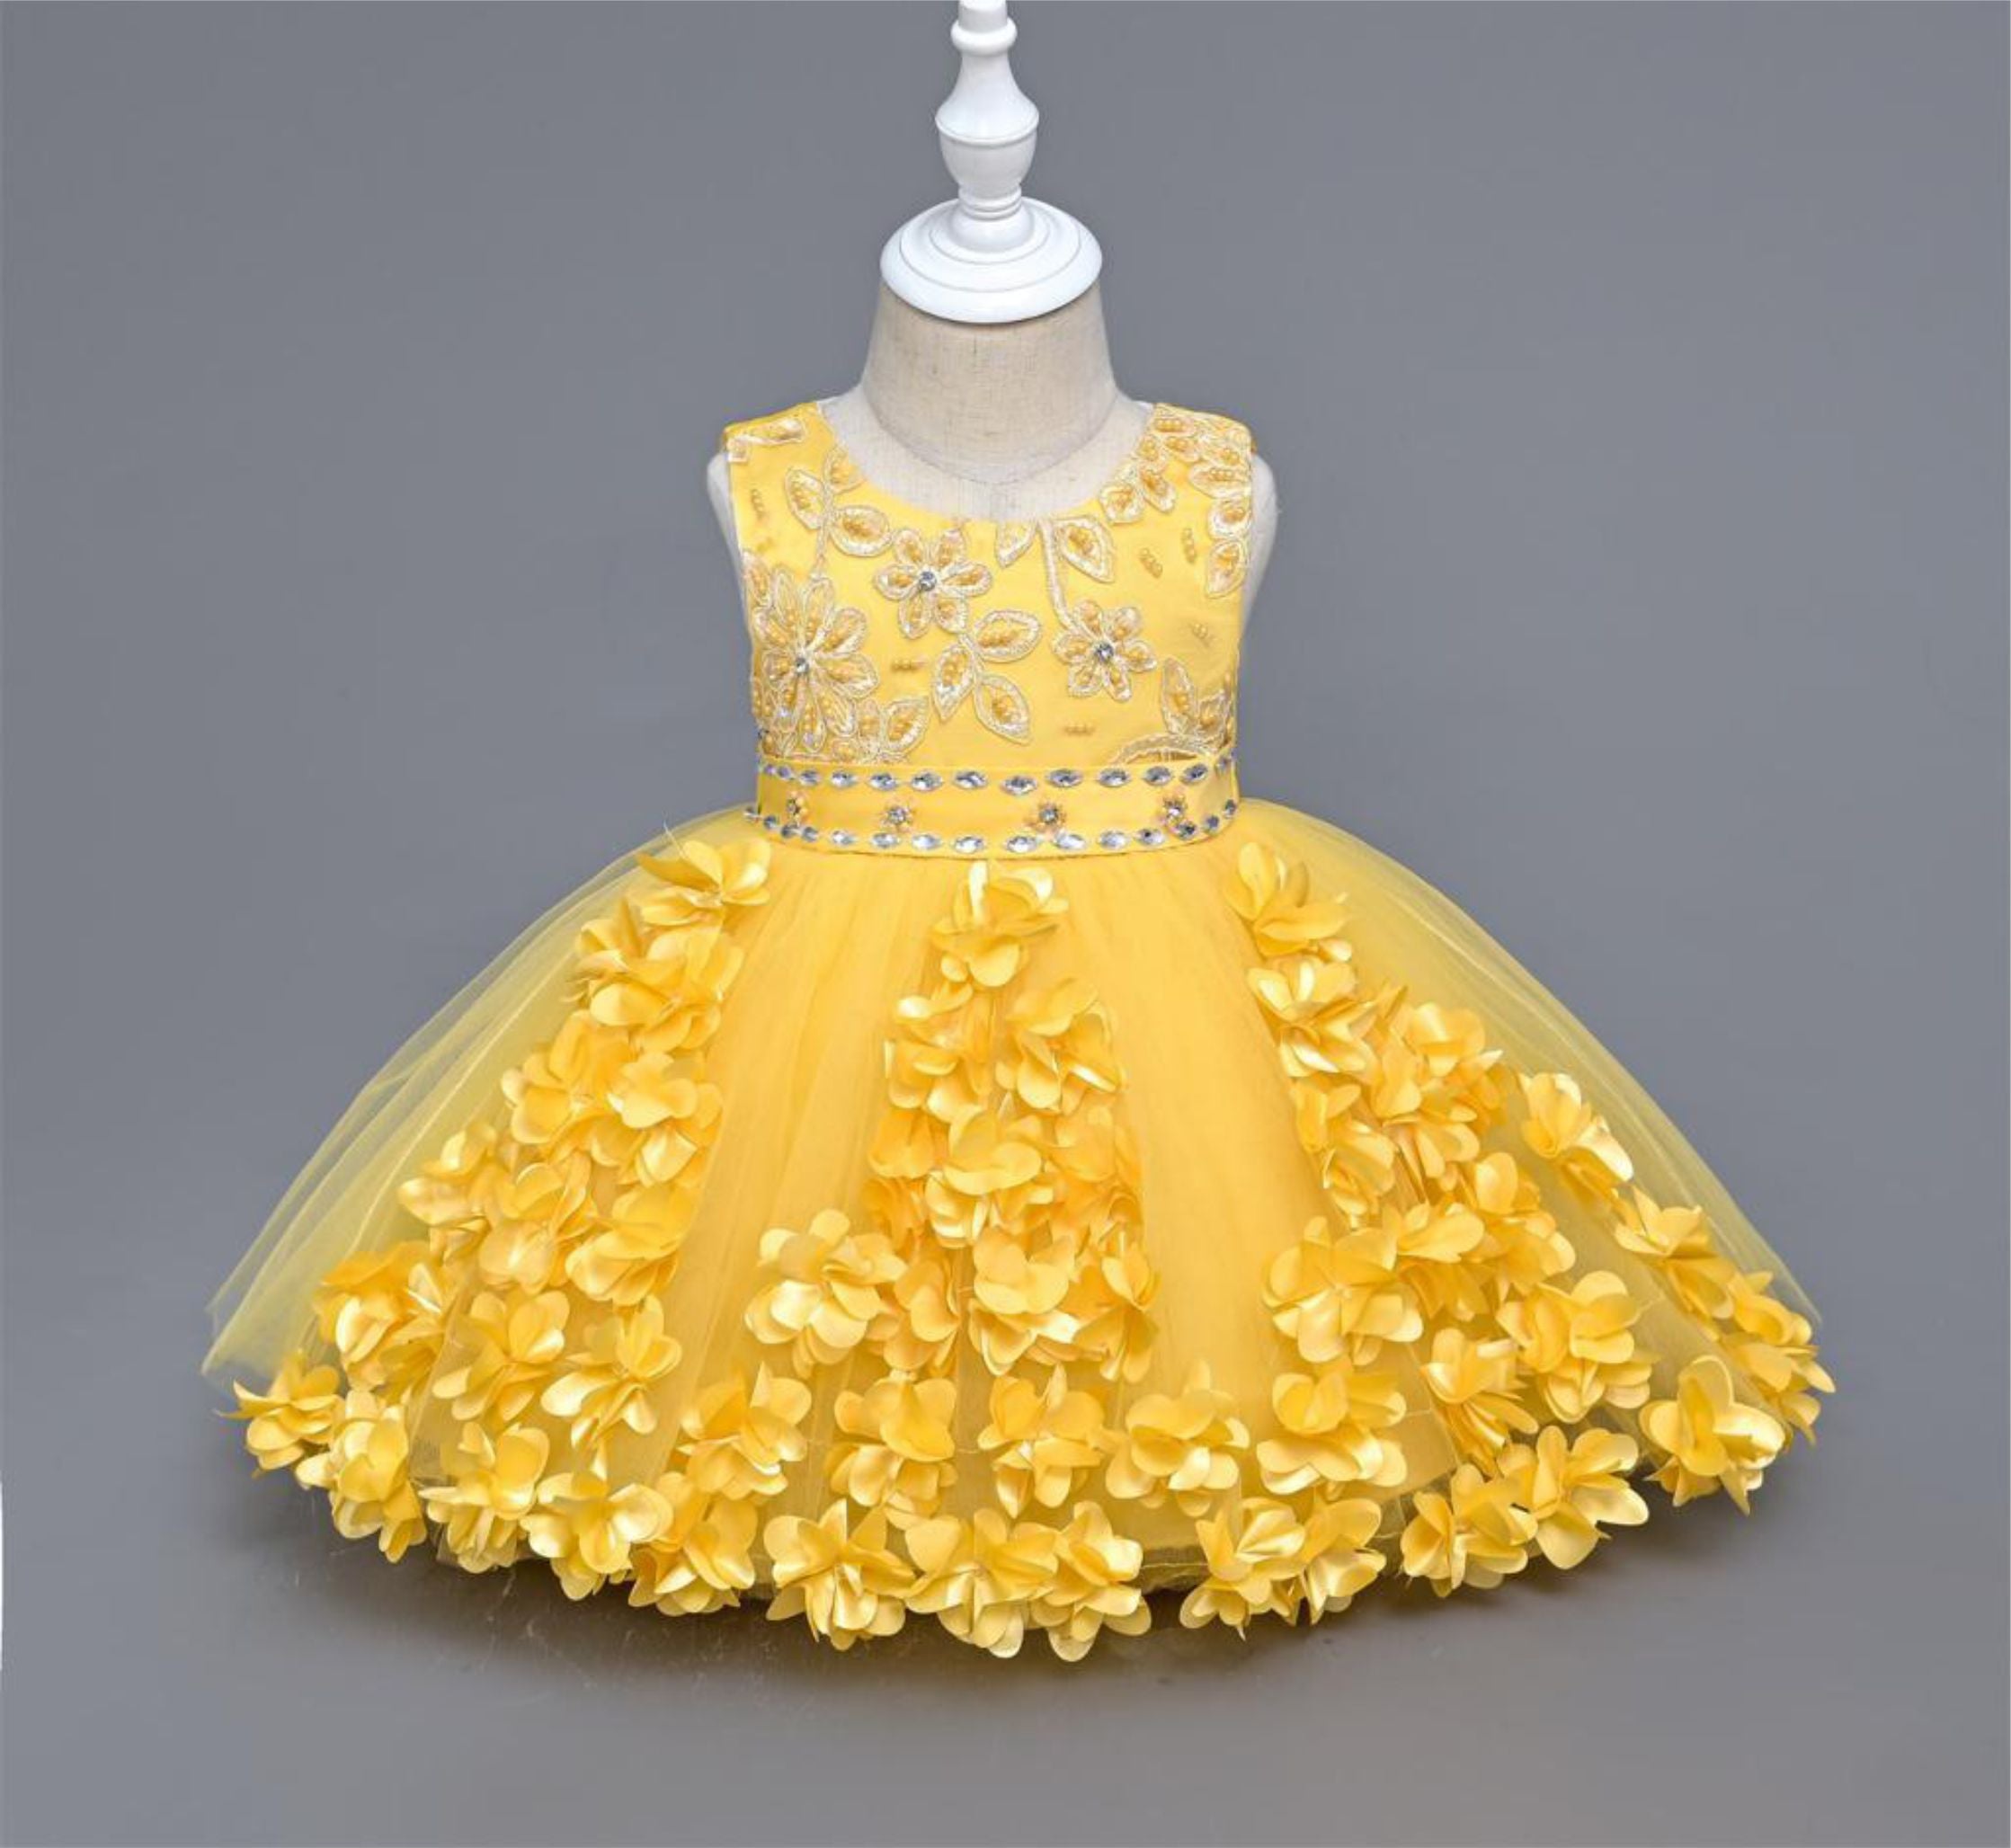 Infant Little Party Dress Nz For First Birthday And Baptism Little Girl  Dress LJ201222 From Cong05, $25.33 | DHgate.Com